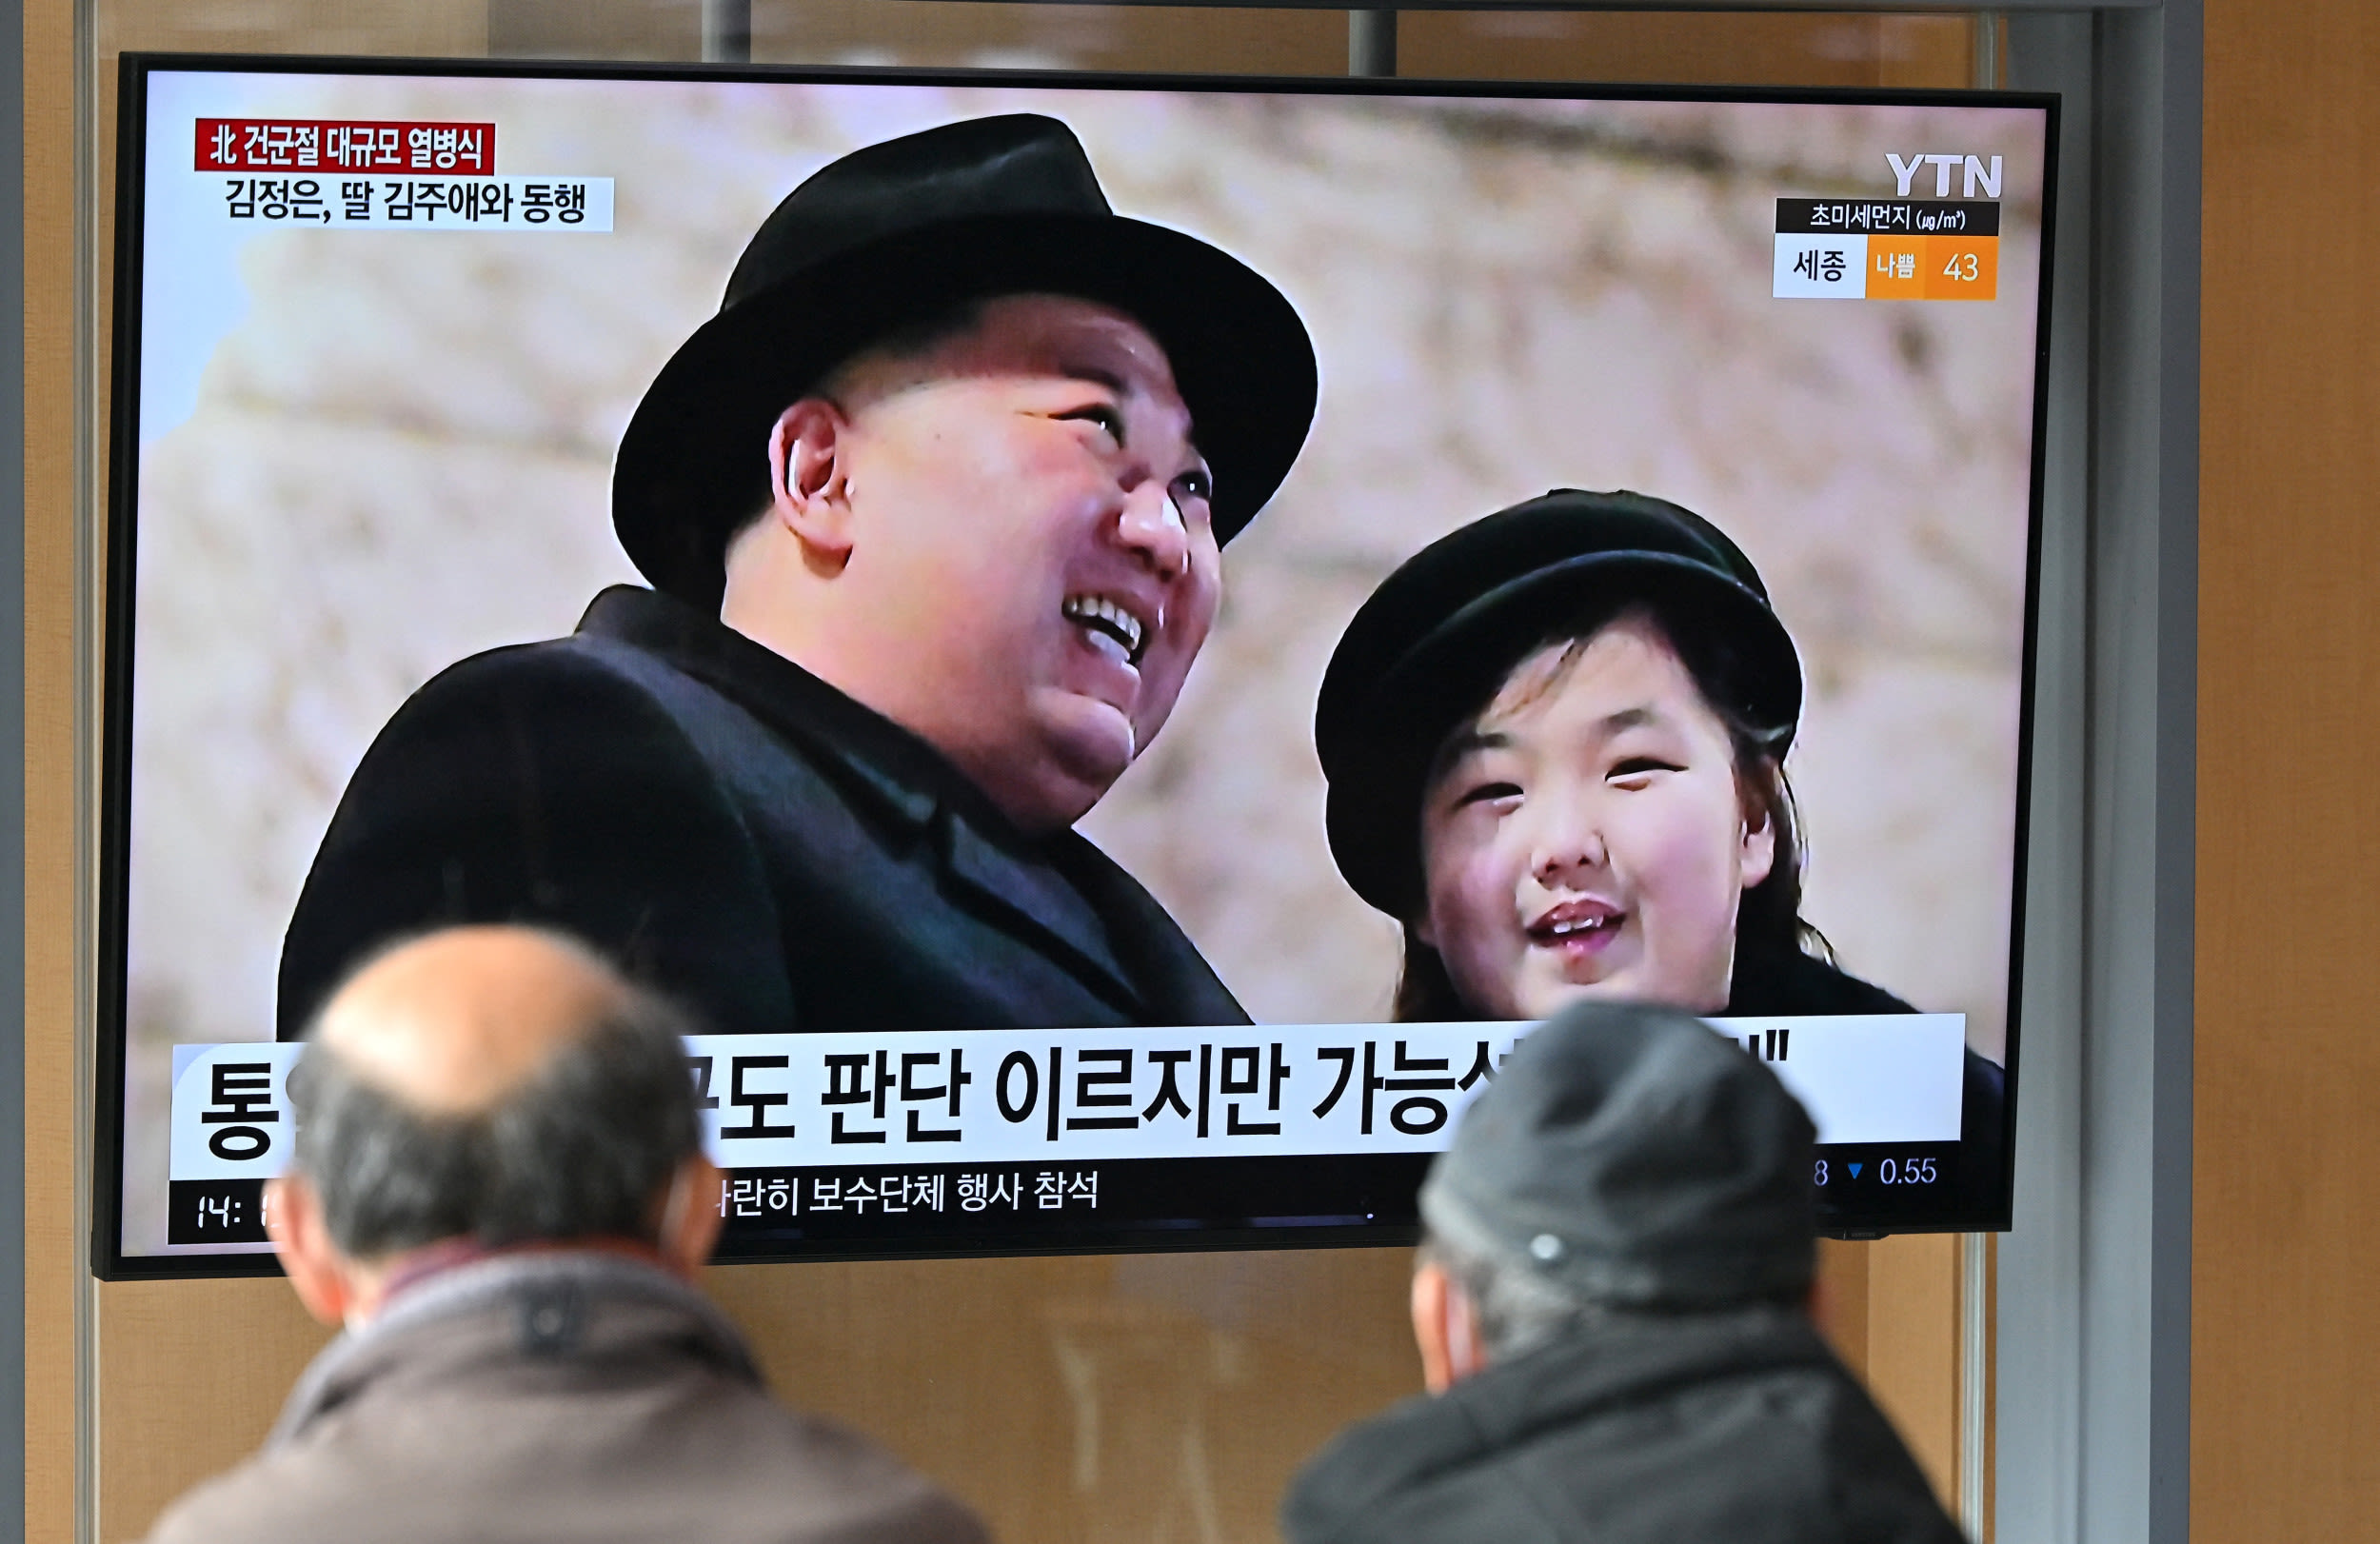 Kim Jong Un's health and successor update given by Seoul